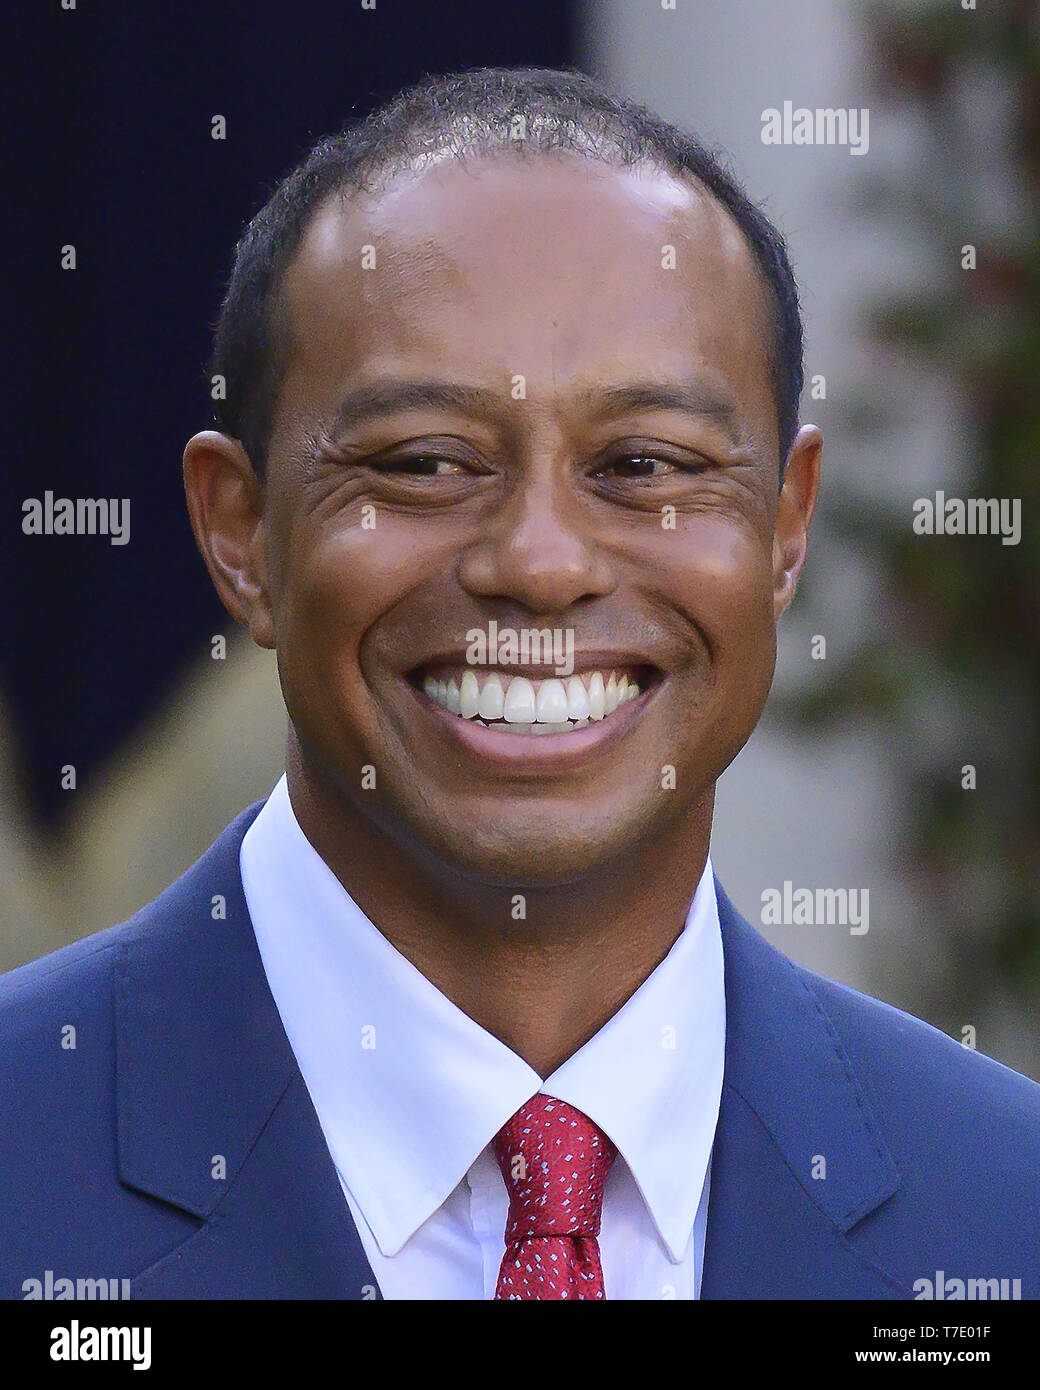 May 6, 2019 - Washington, District of Columbia, U.S. - Professional golfer Tiger Woods listens as United States President Donald J. Trump makes remarks presenting him the Presidential Medal of Freedom during a ceremony in the Rose Garden of the White House in Washington, DC on May 6, 2019. The Presidential Medal of Freedom is an award bestowed by the President of the United States to recognize those people who have made ''an especially meritorious contribution to the security or national interests of the United States, world peace, cultural or other significant public or private endeavor.''.C Stock Photo